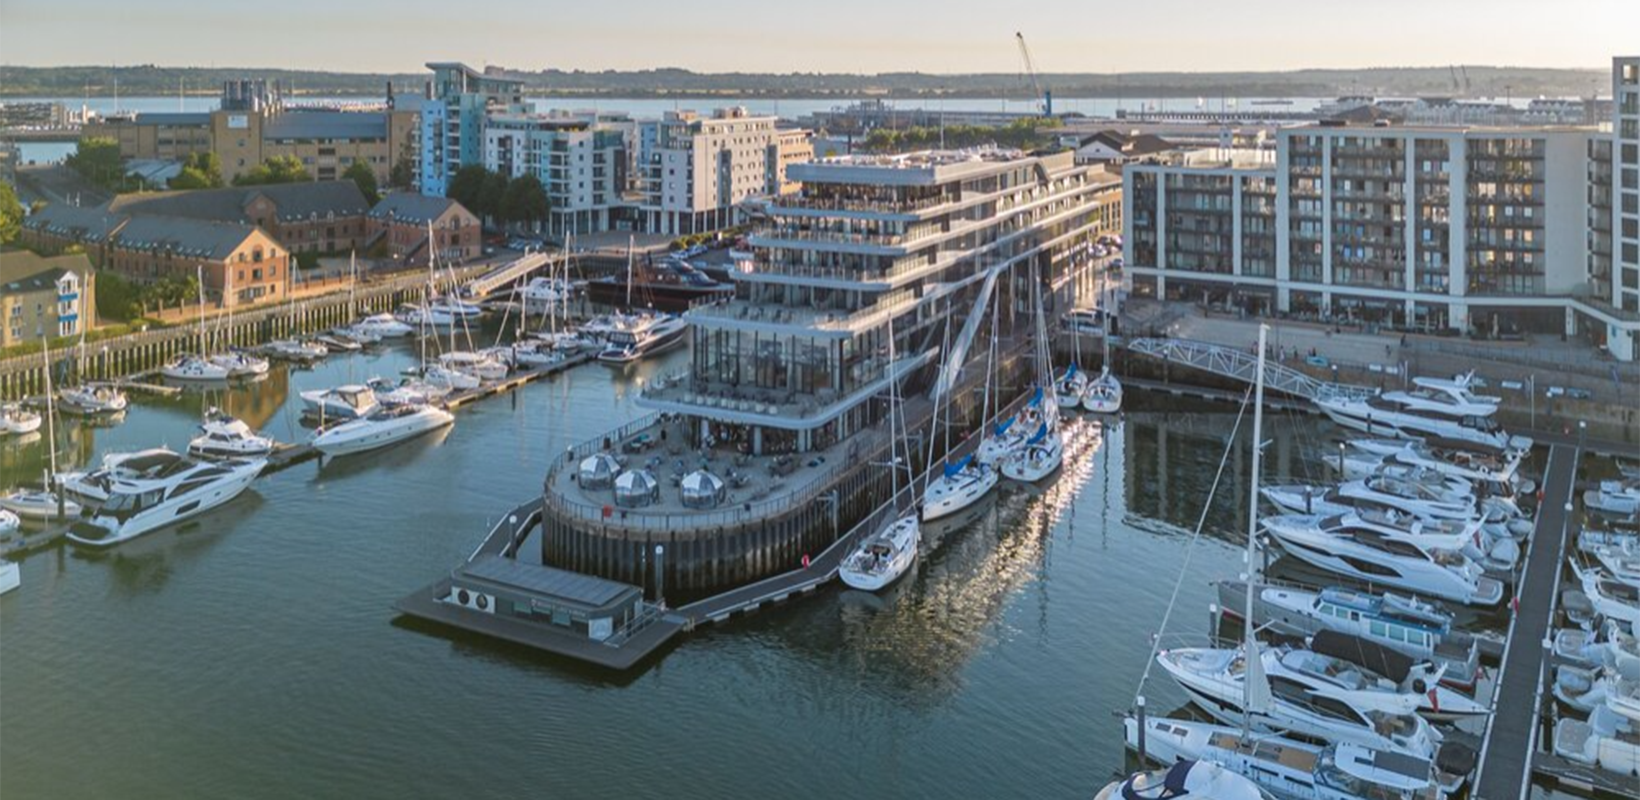 Paul Bayliss named general manager of Harbour Hotel Southampton